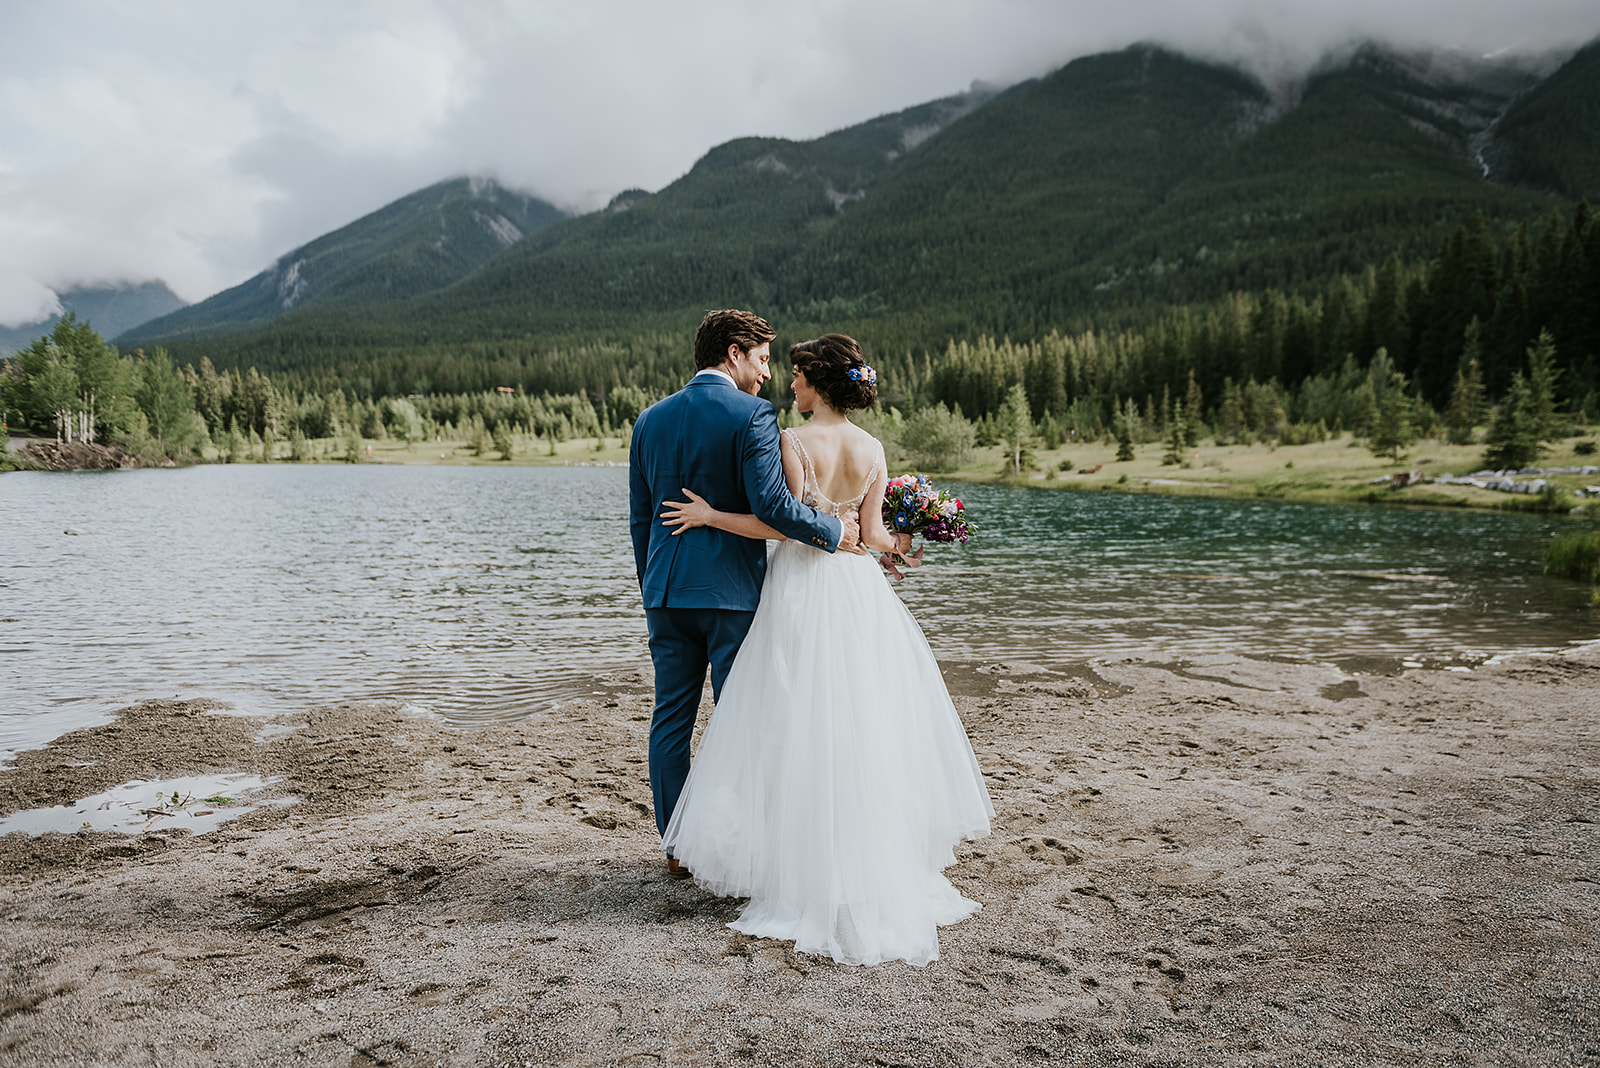 Intimate Mountaintop Wedding in Canmore With Colourful Wildflowers & Glasses of Bubbly for Each Guest - Micro Wedding Featured on Brontë Bride